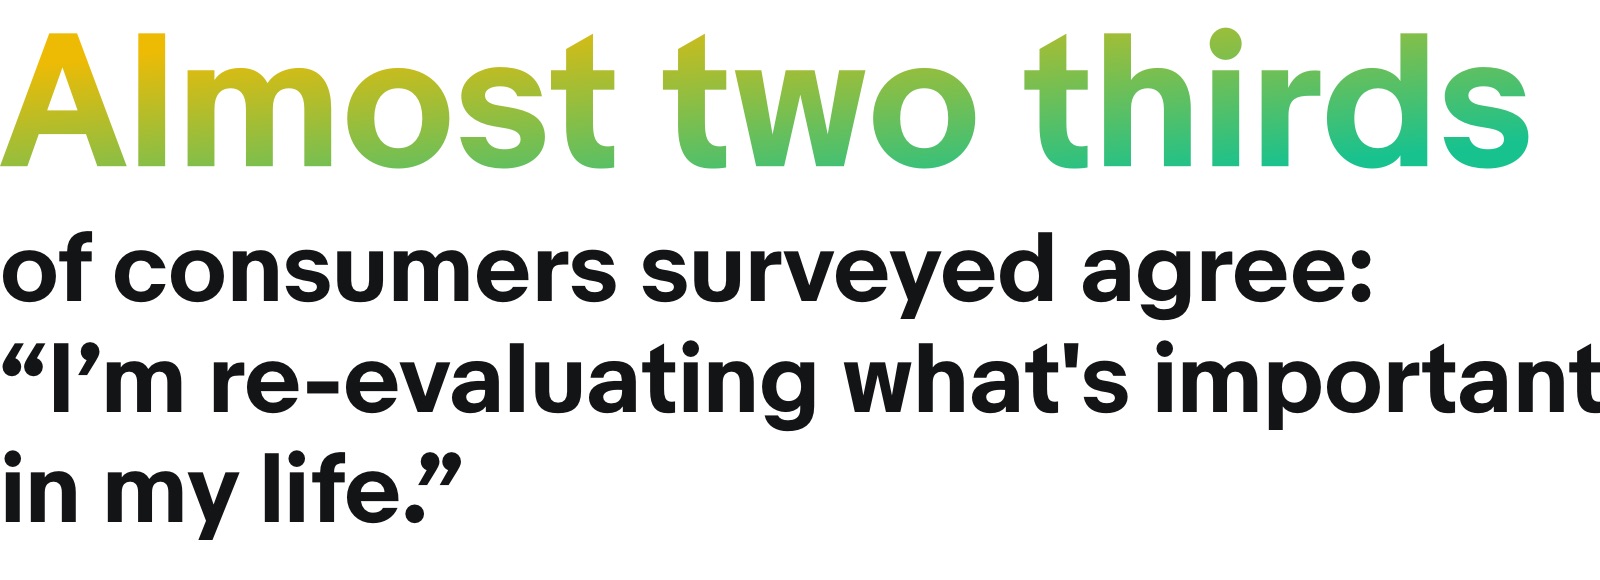 Almost two thirds of consumers surveyed agree: "I'm re-evaluating what's important in my life."